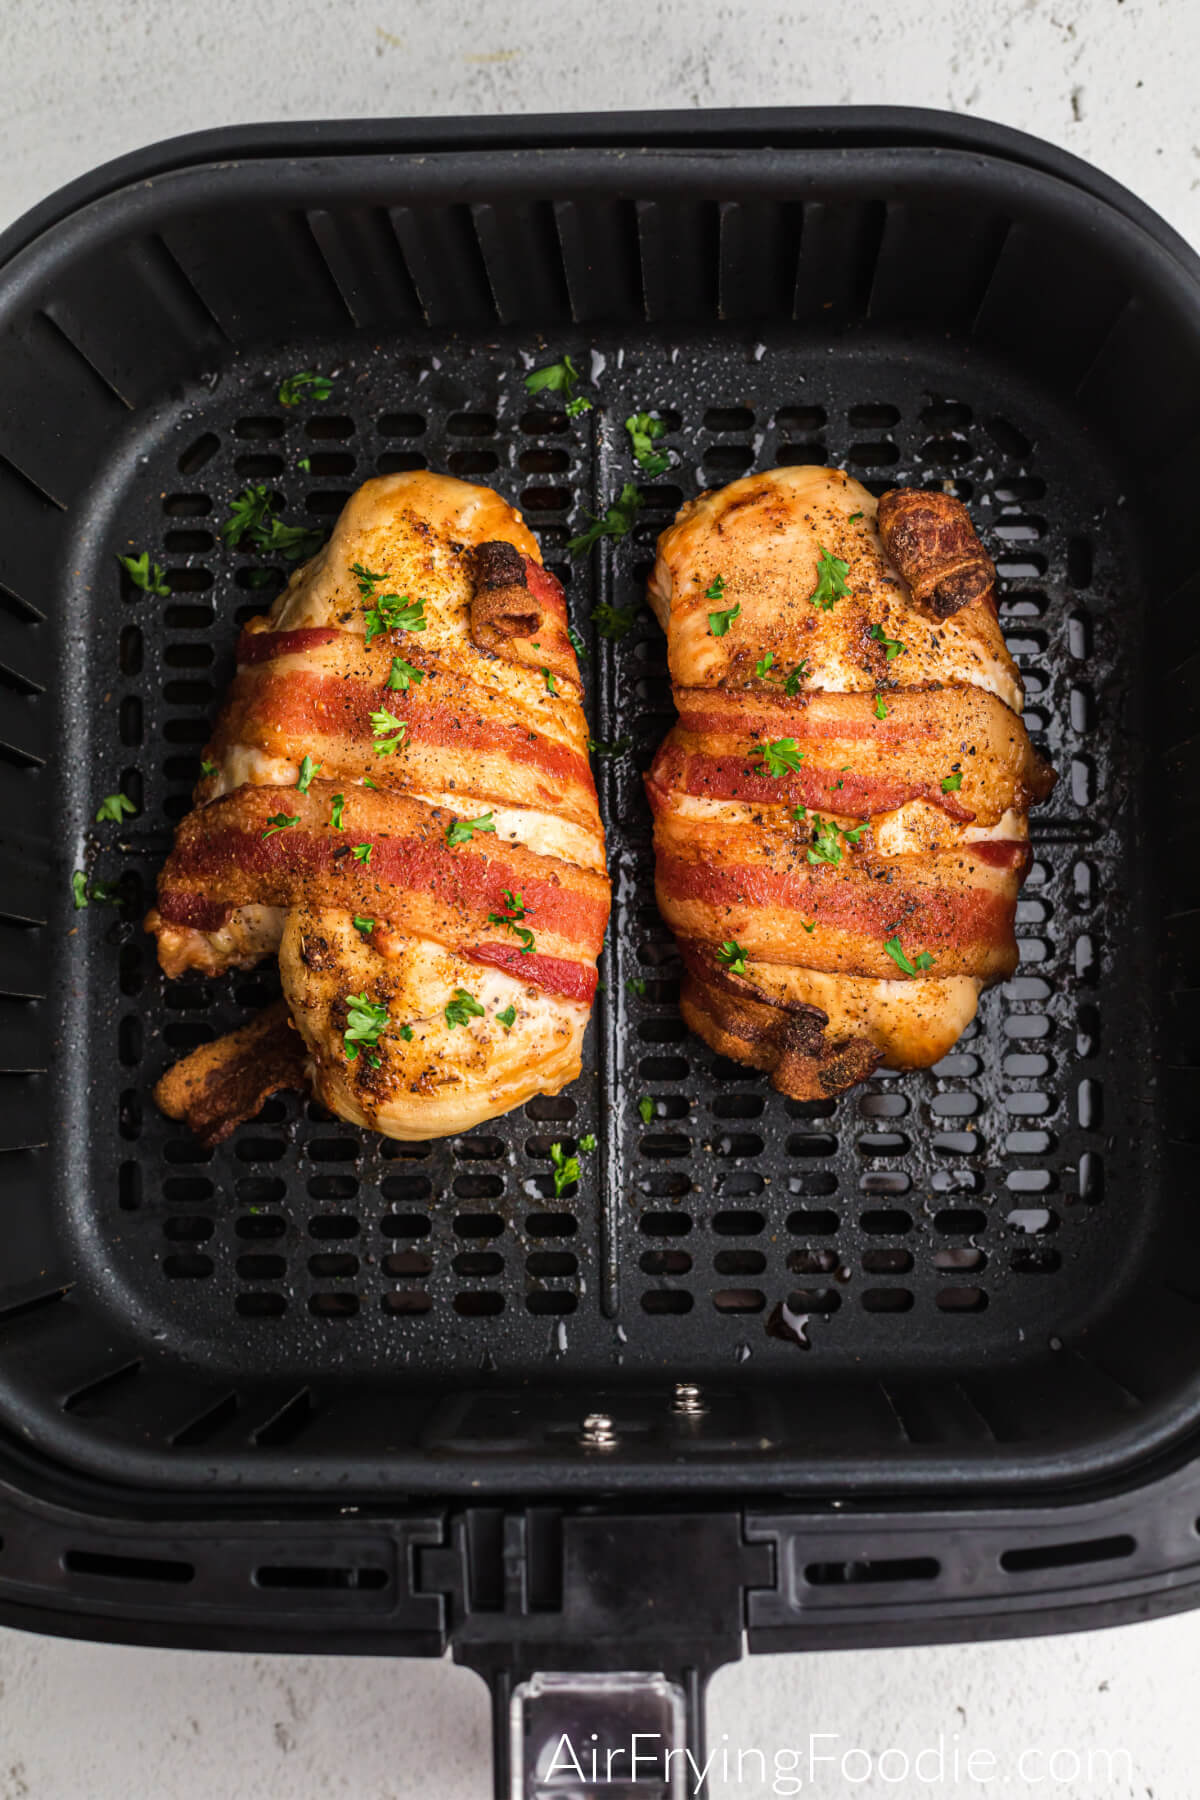 Air fried bacon wrapped chicken in the basket of the air fryer.